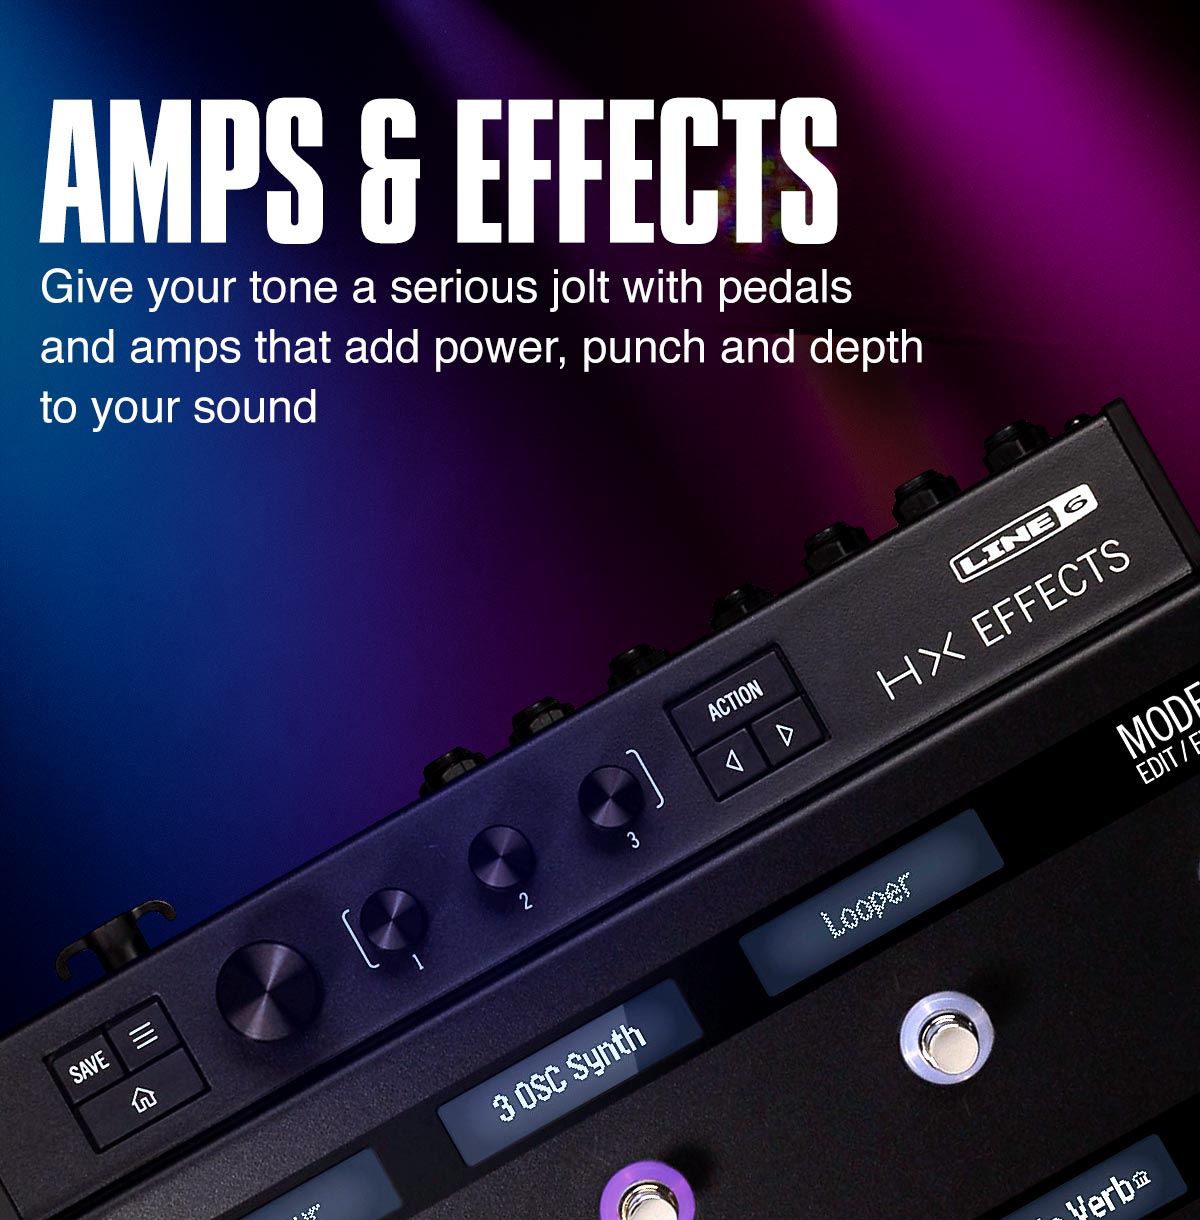 Amps and effects. Give your tone a serious jolt with pedals and amps that add power, punch and depth to your sound.